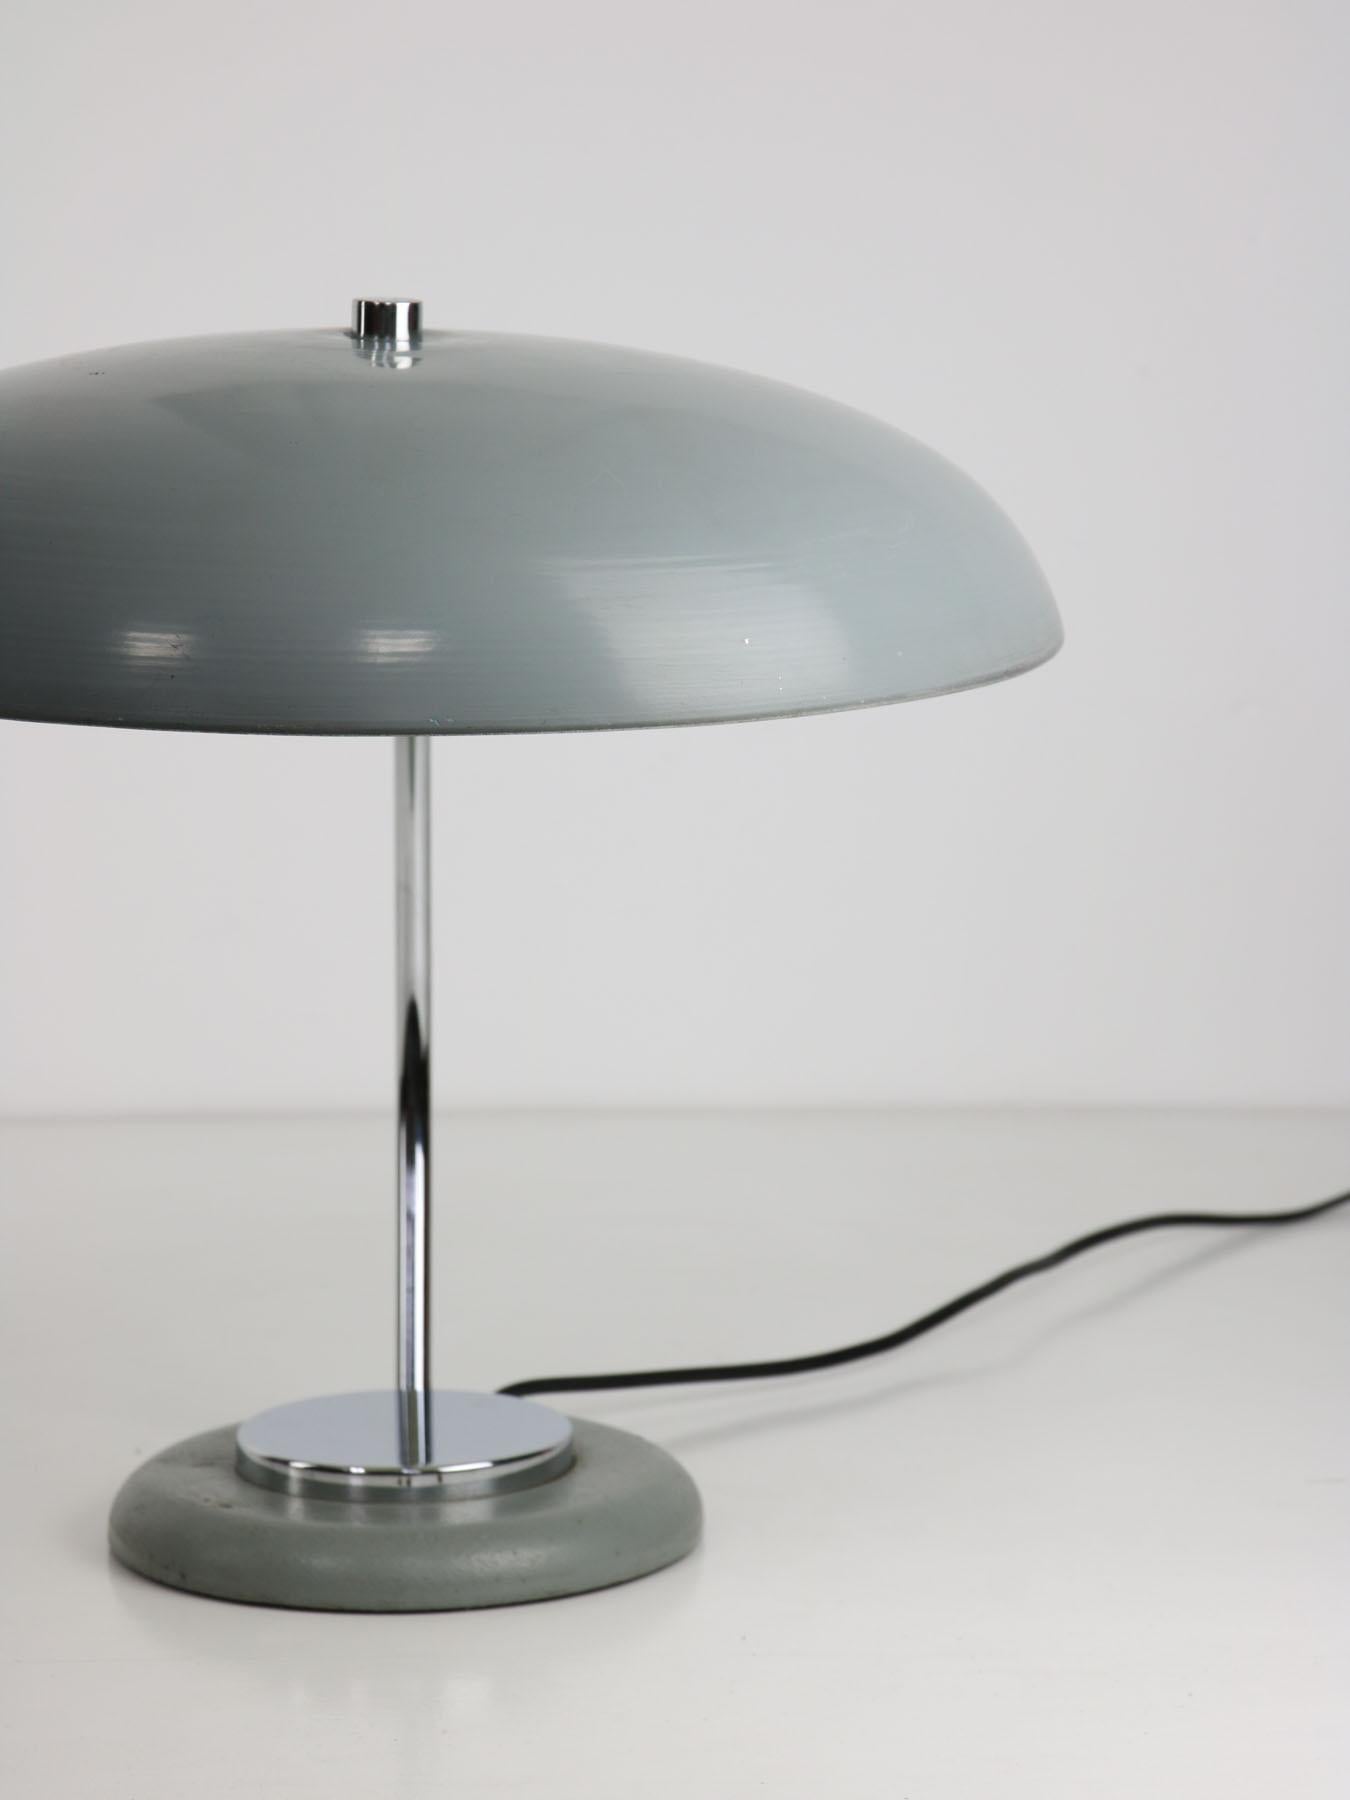 Bauhaus Saucer Table Lamp with Big Button For Sale 4